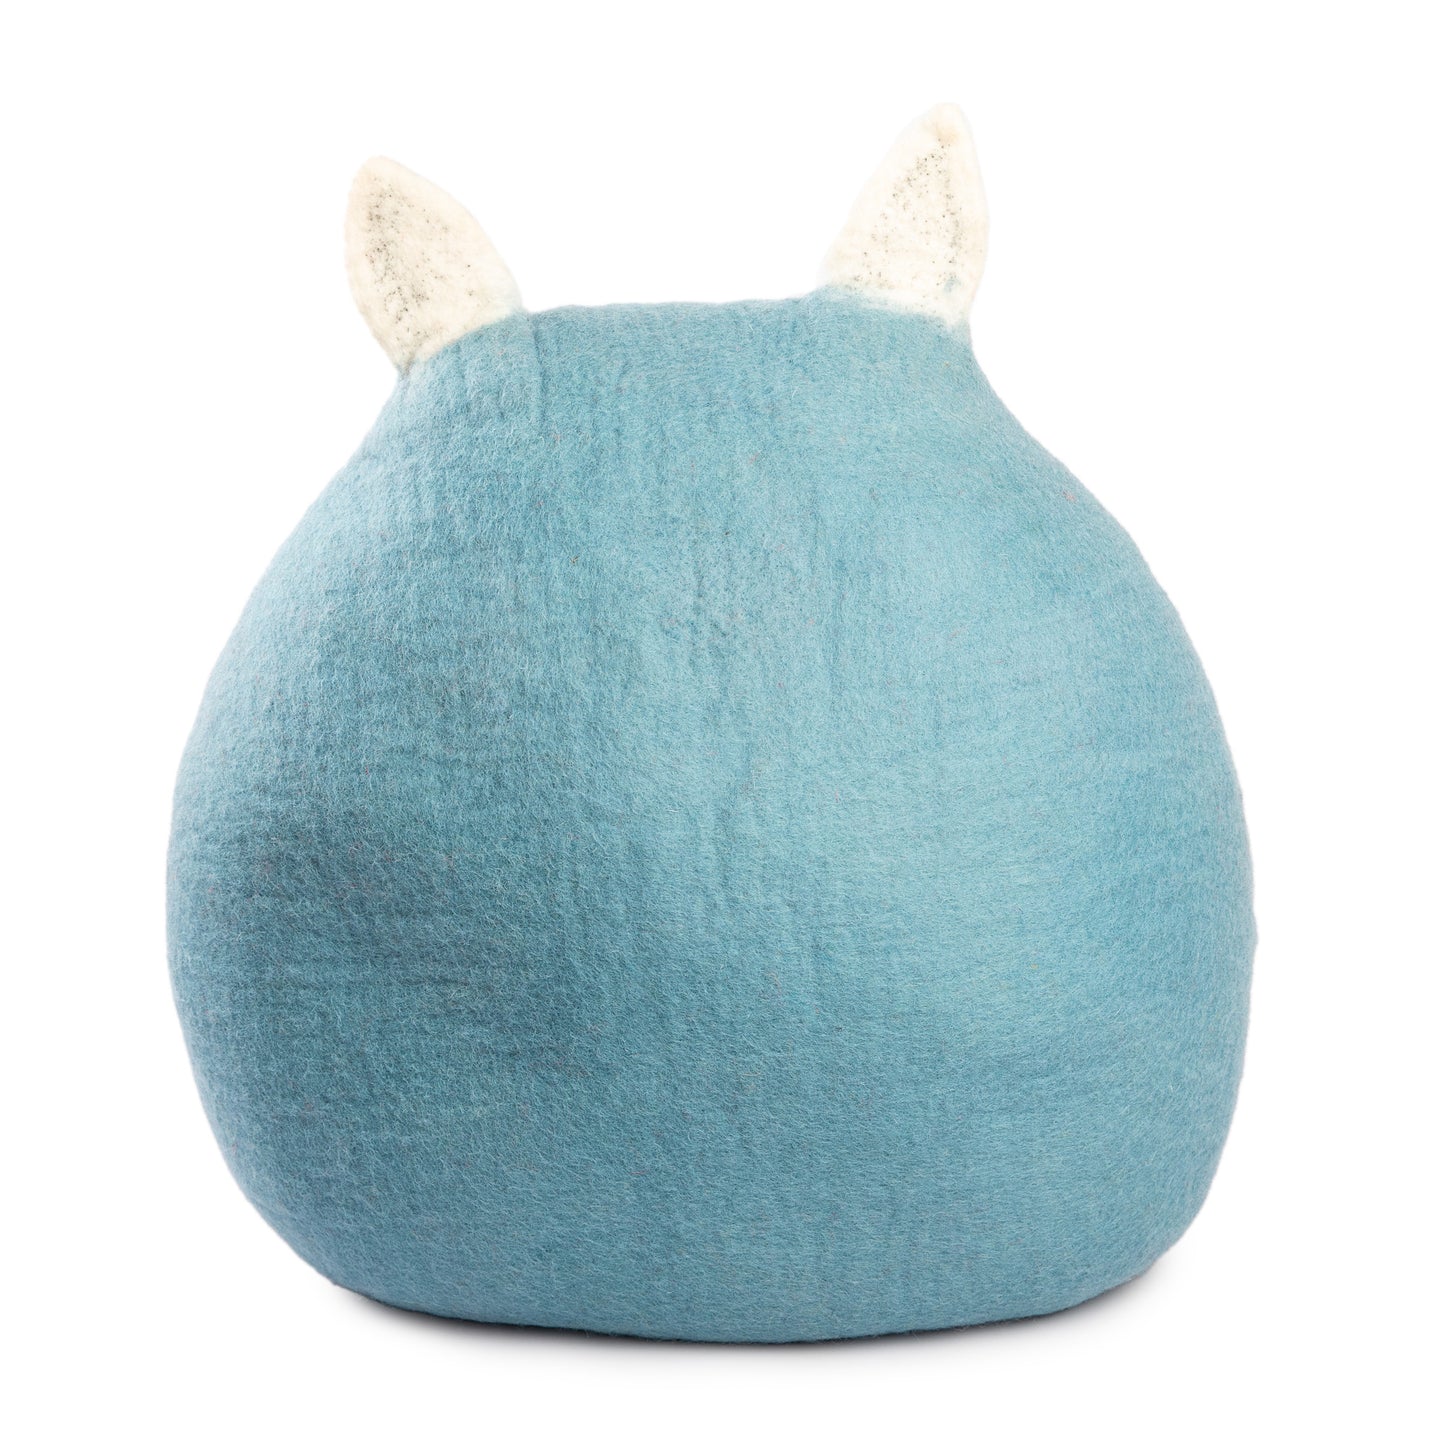 Woolygon Merino Wool Cuddle Cave: Naturally Soft & Supportive Cat Haven House